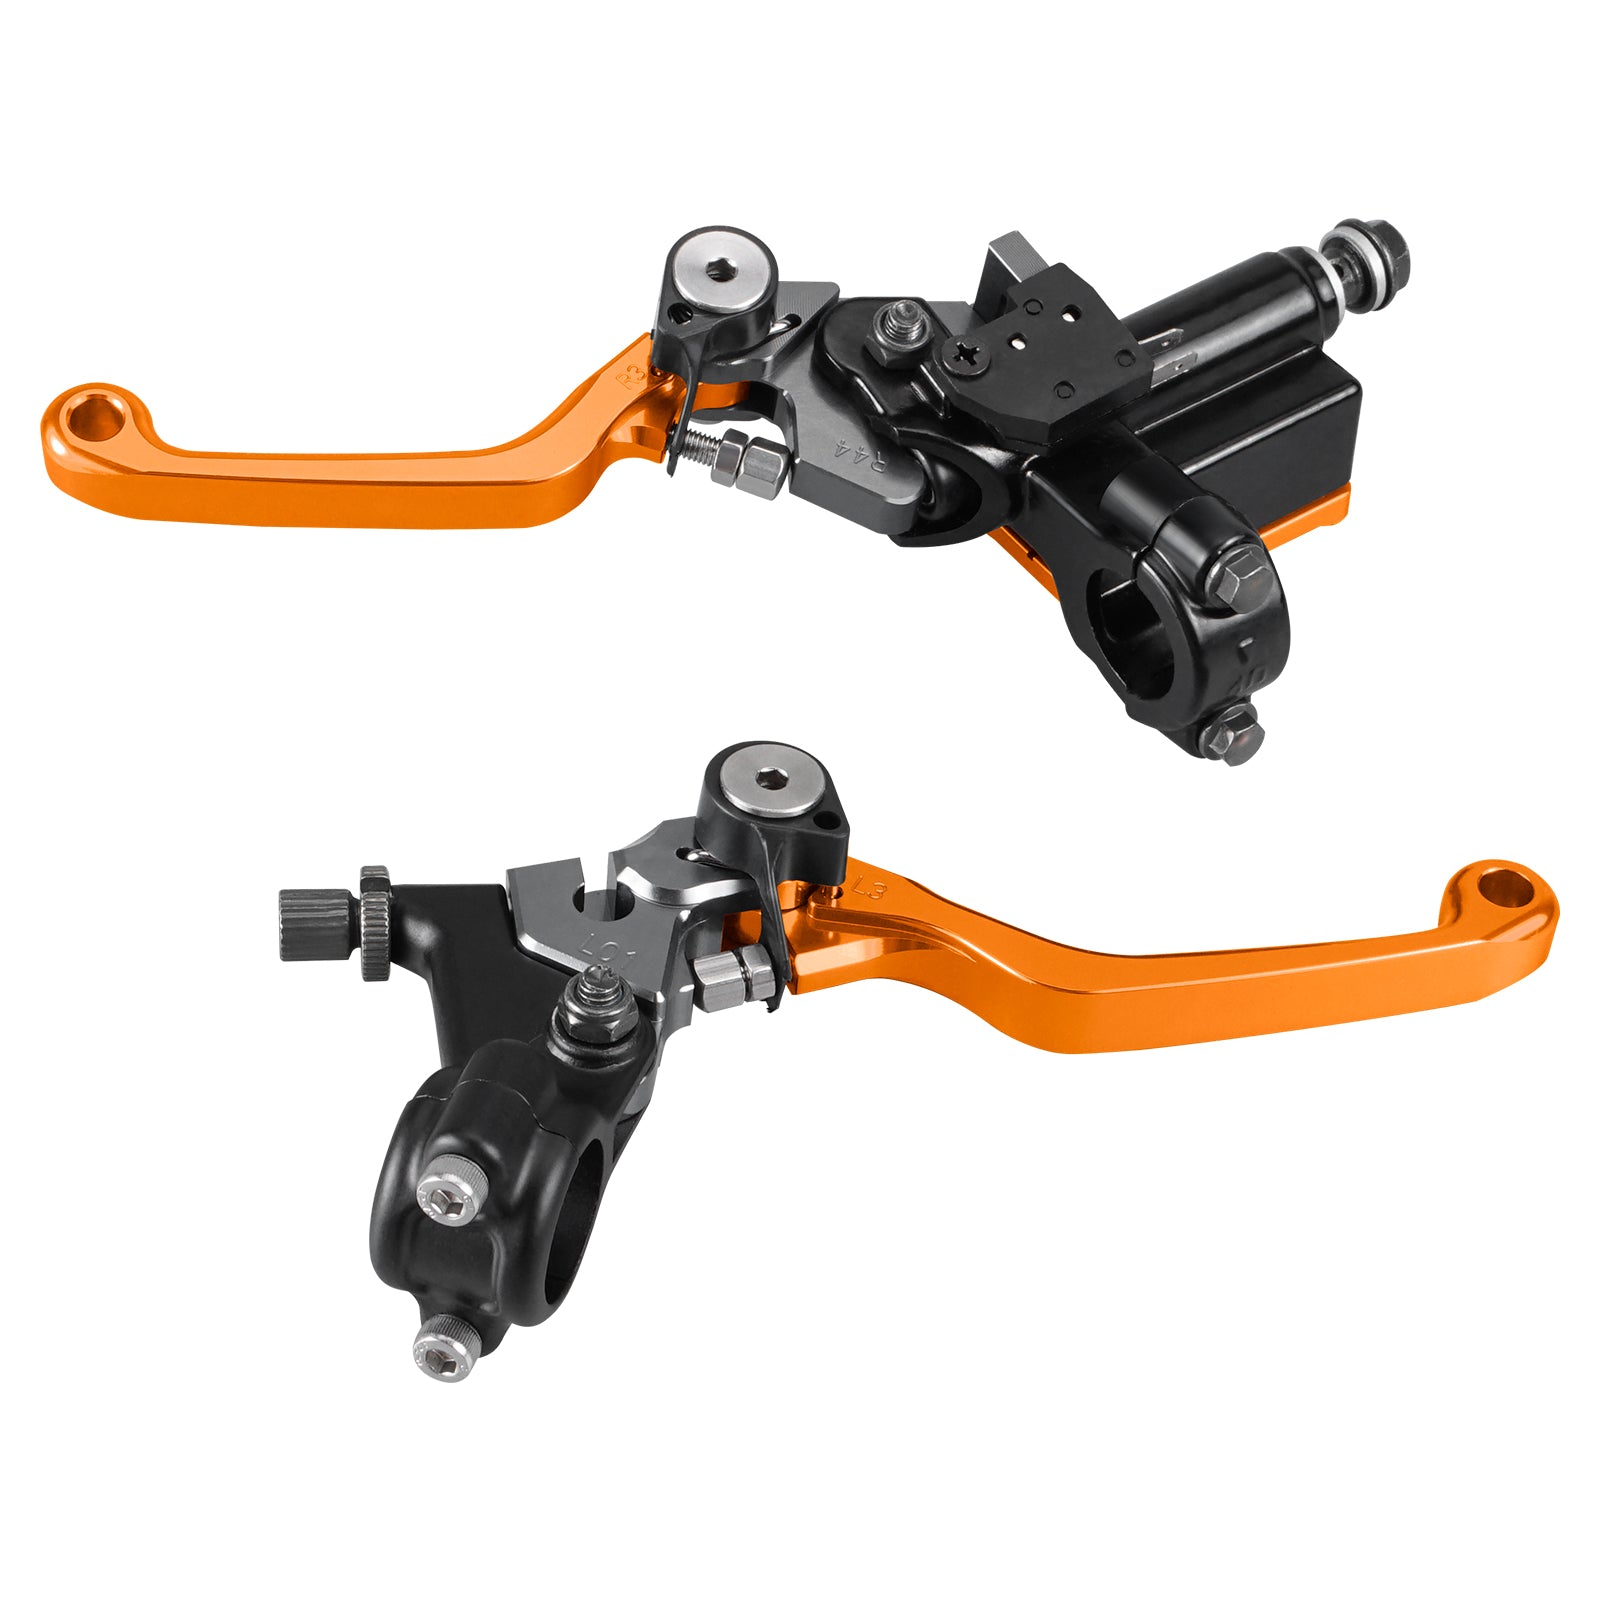 7/8" Hydraulic Brake Cable Clutch Levers for OFF-Road Motorcycles